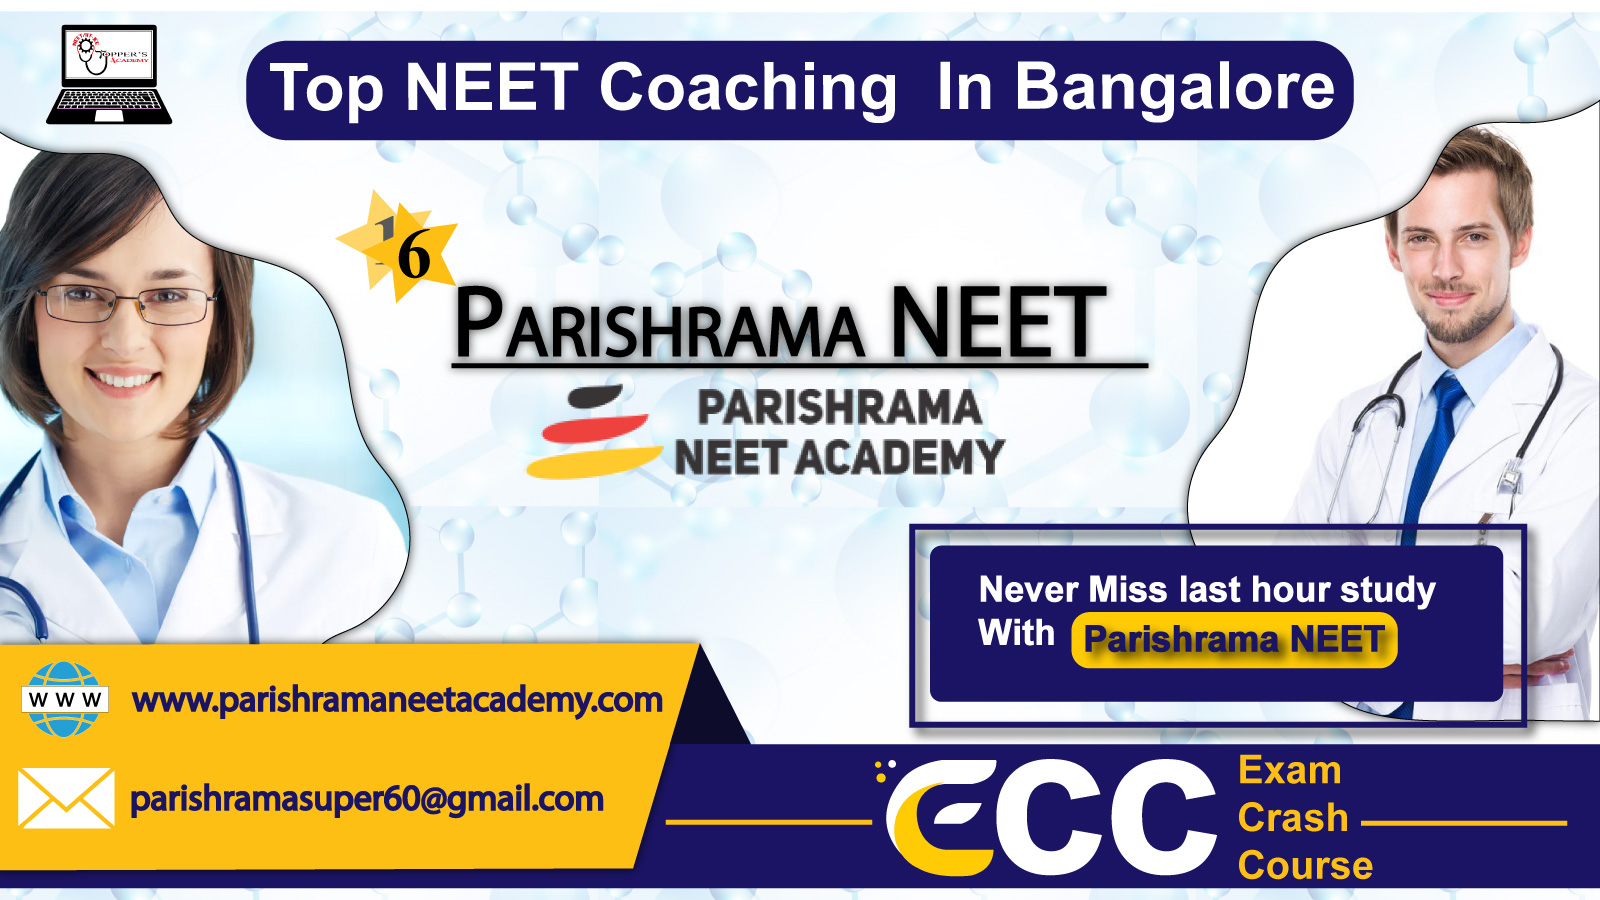 Best coaching institute for neet in bangalore